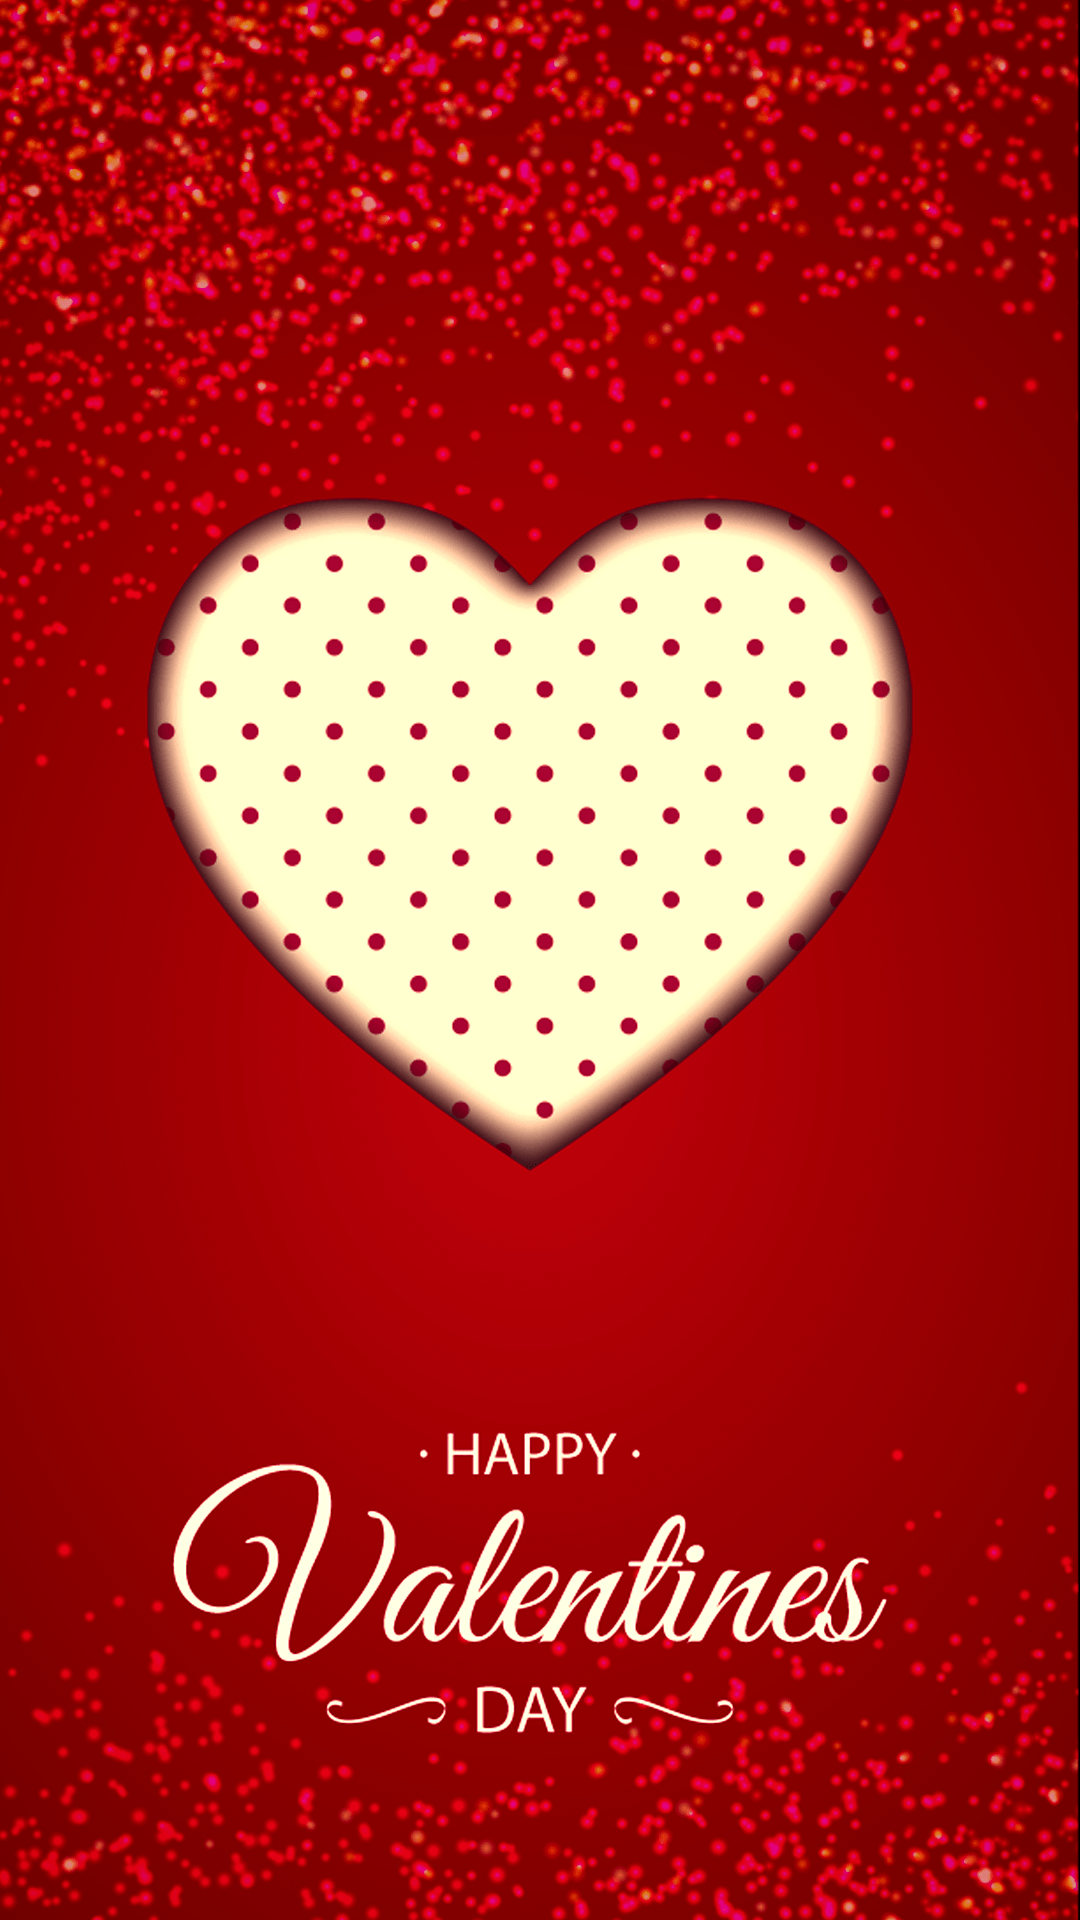 Free Valentine's Day Desktop Wallpapers | Feel Love in the Air